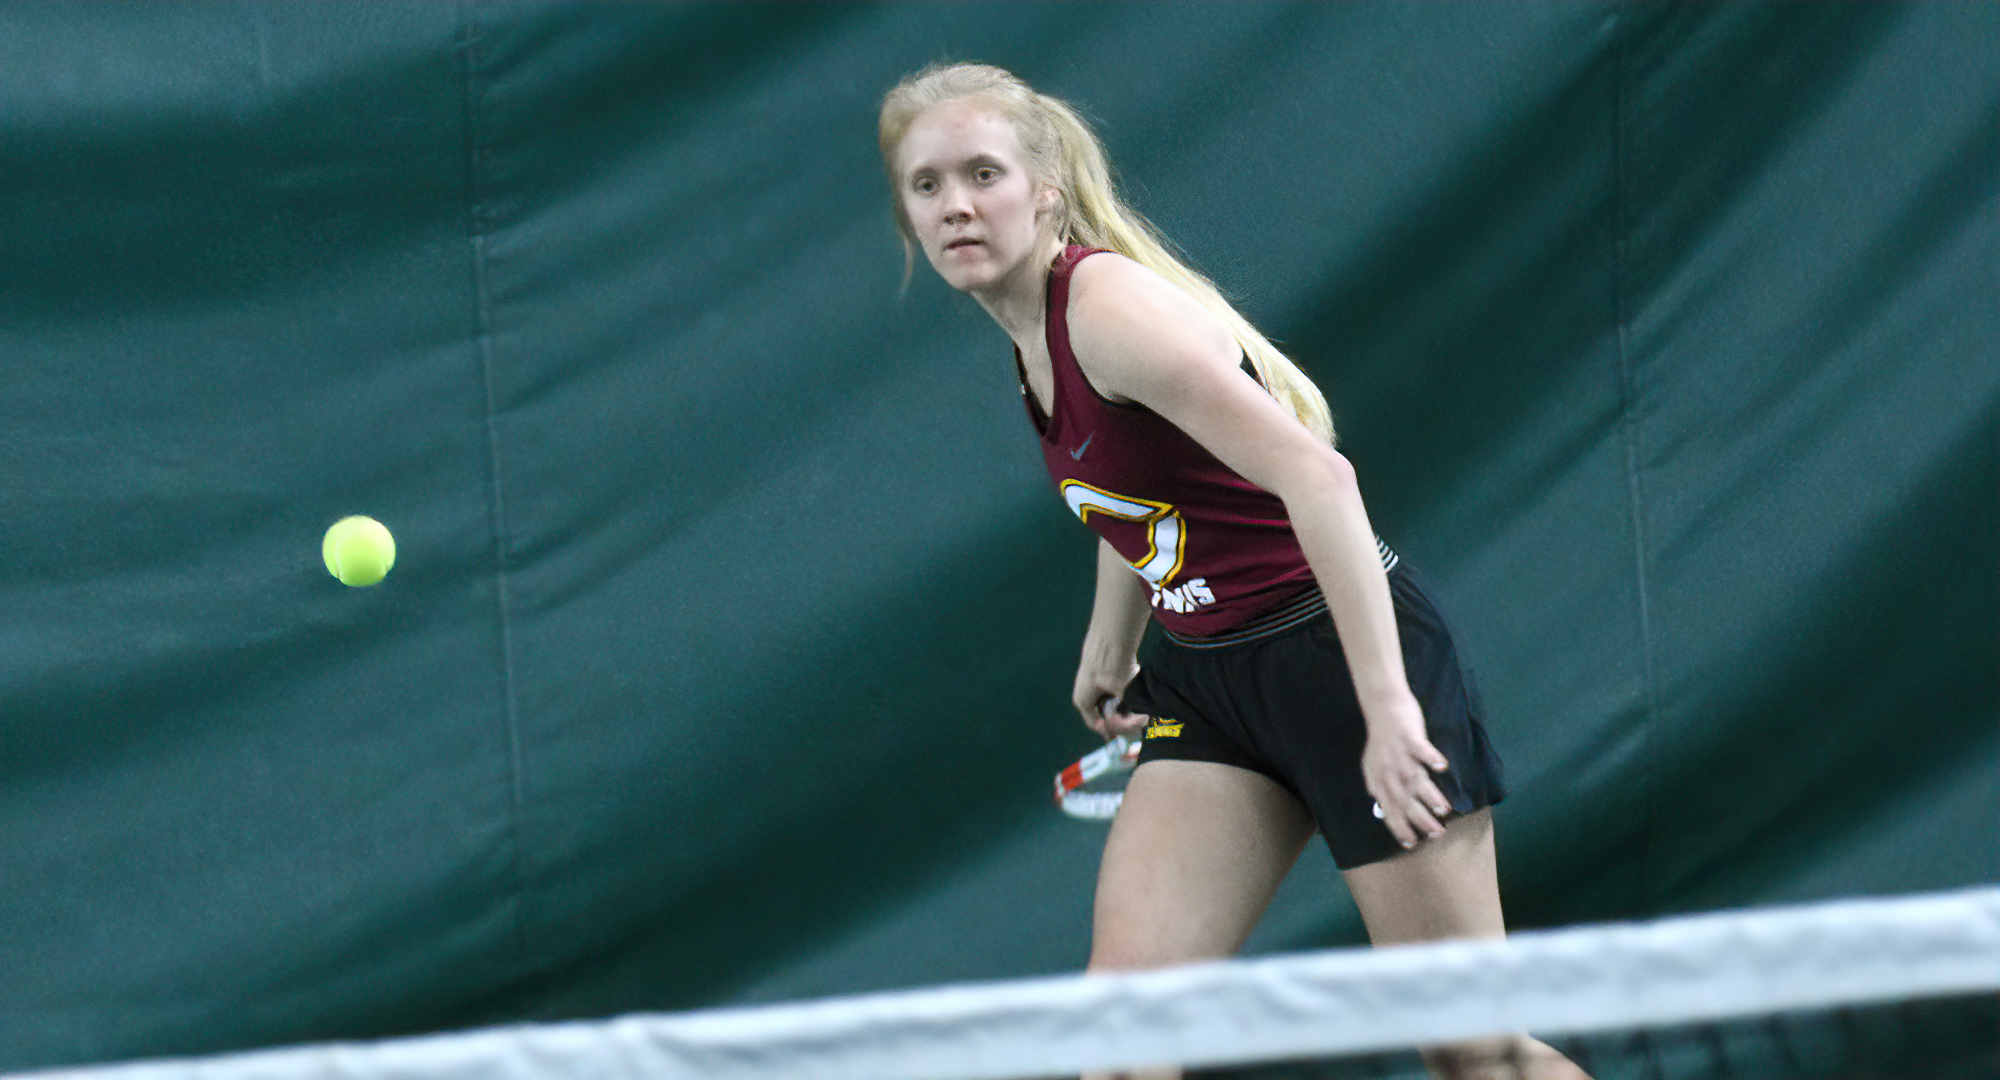 Erin Borchard won both her doubles and singles matches against unbeaten St. Kate's. She is now 5-1 in singles and 2-0 in doubles in 2022.